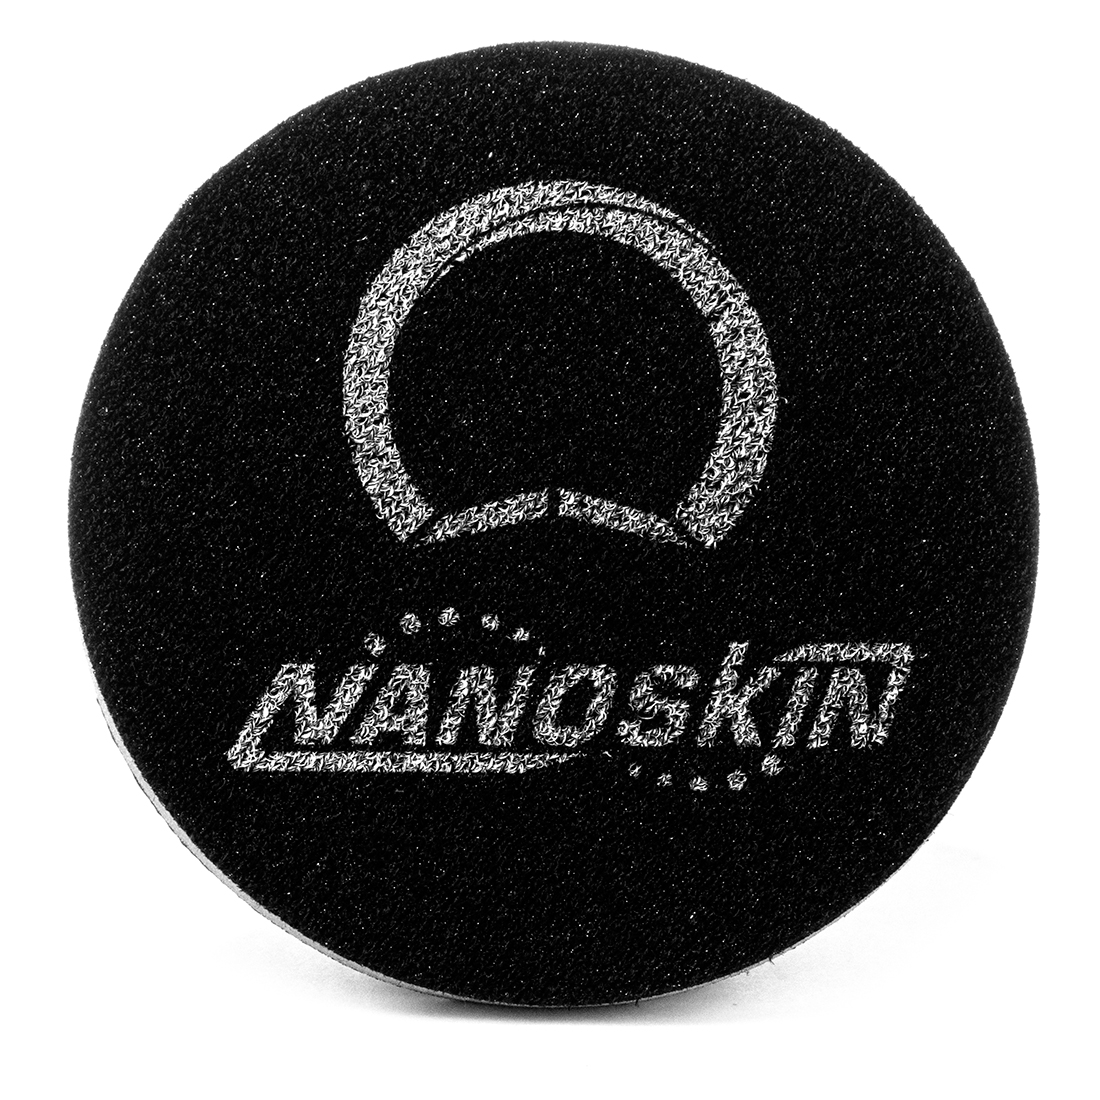 Nanoskin AUTOSCRUB 6" Surface Prep Pad - Fine Grade - Patented Clay Bar Replacement Tool to Remove Embedded Contaminants Before Wax & Coating | Safe for Painted Surface, Glass, Plastic, Metal & More - image 2 of 4